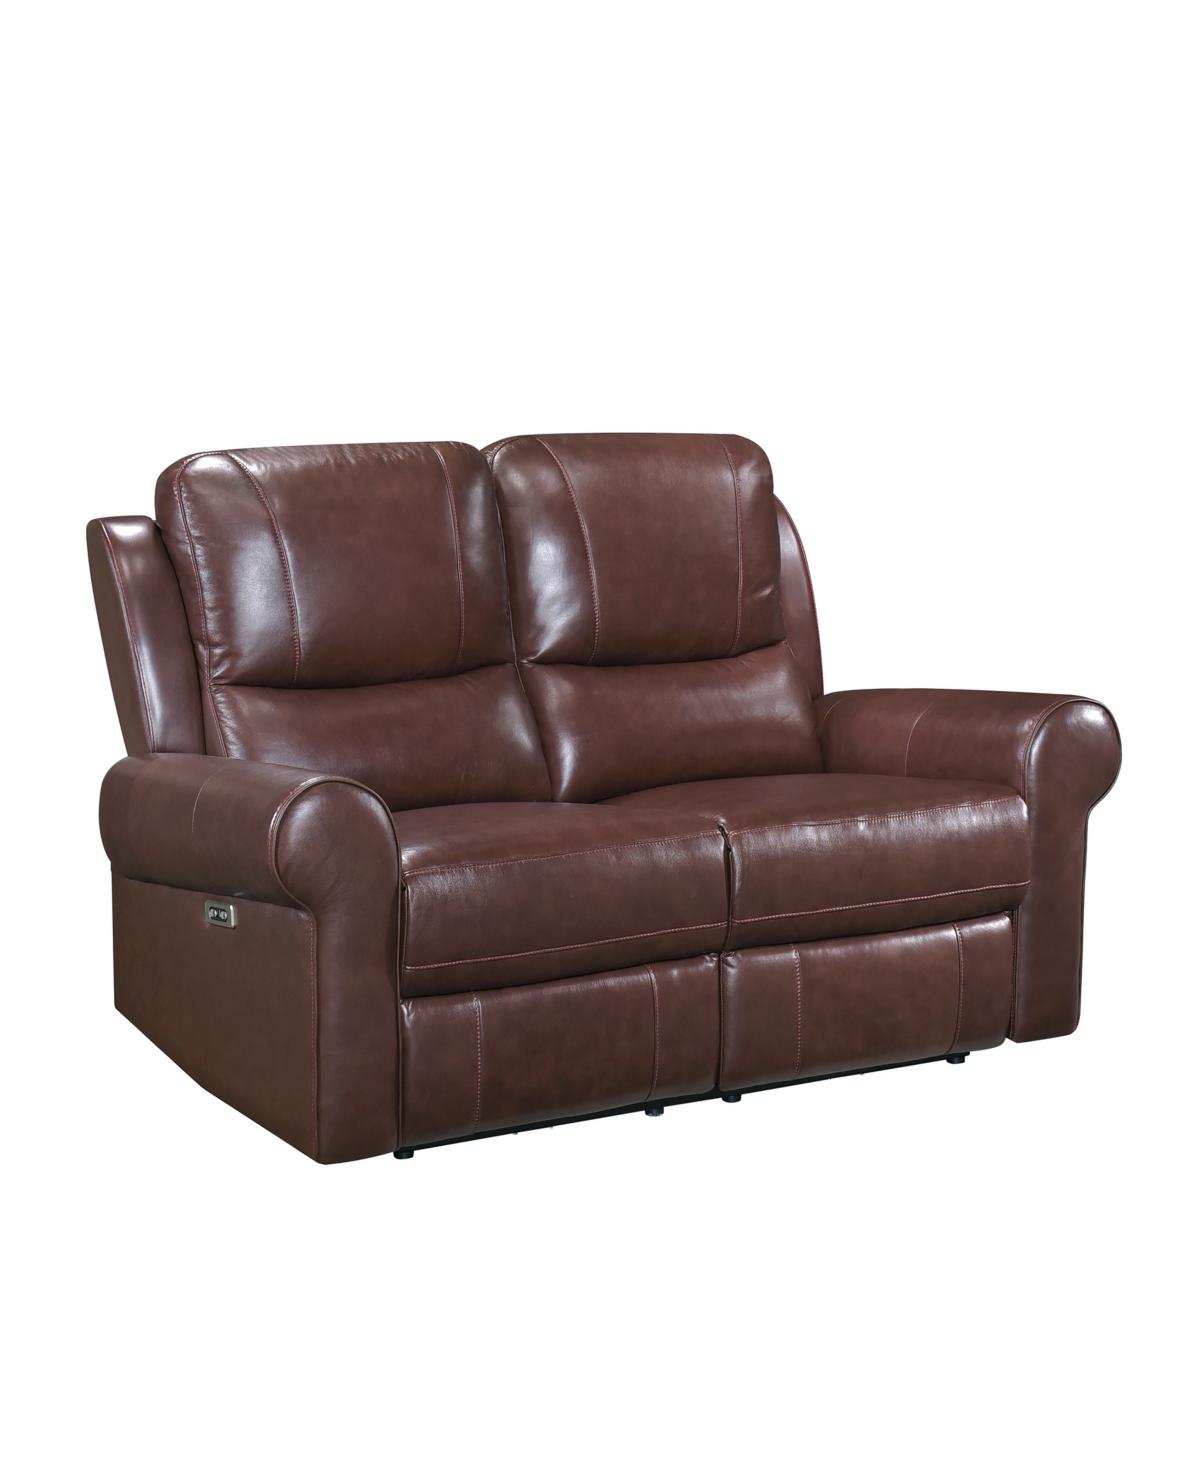 Homelegance White Label Florentina 61" Leather Match Power With Power Headrests Double Reclining Love Seat In Brown